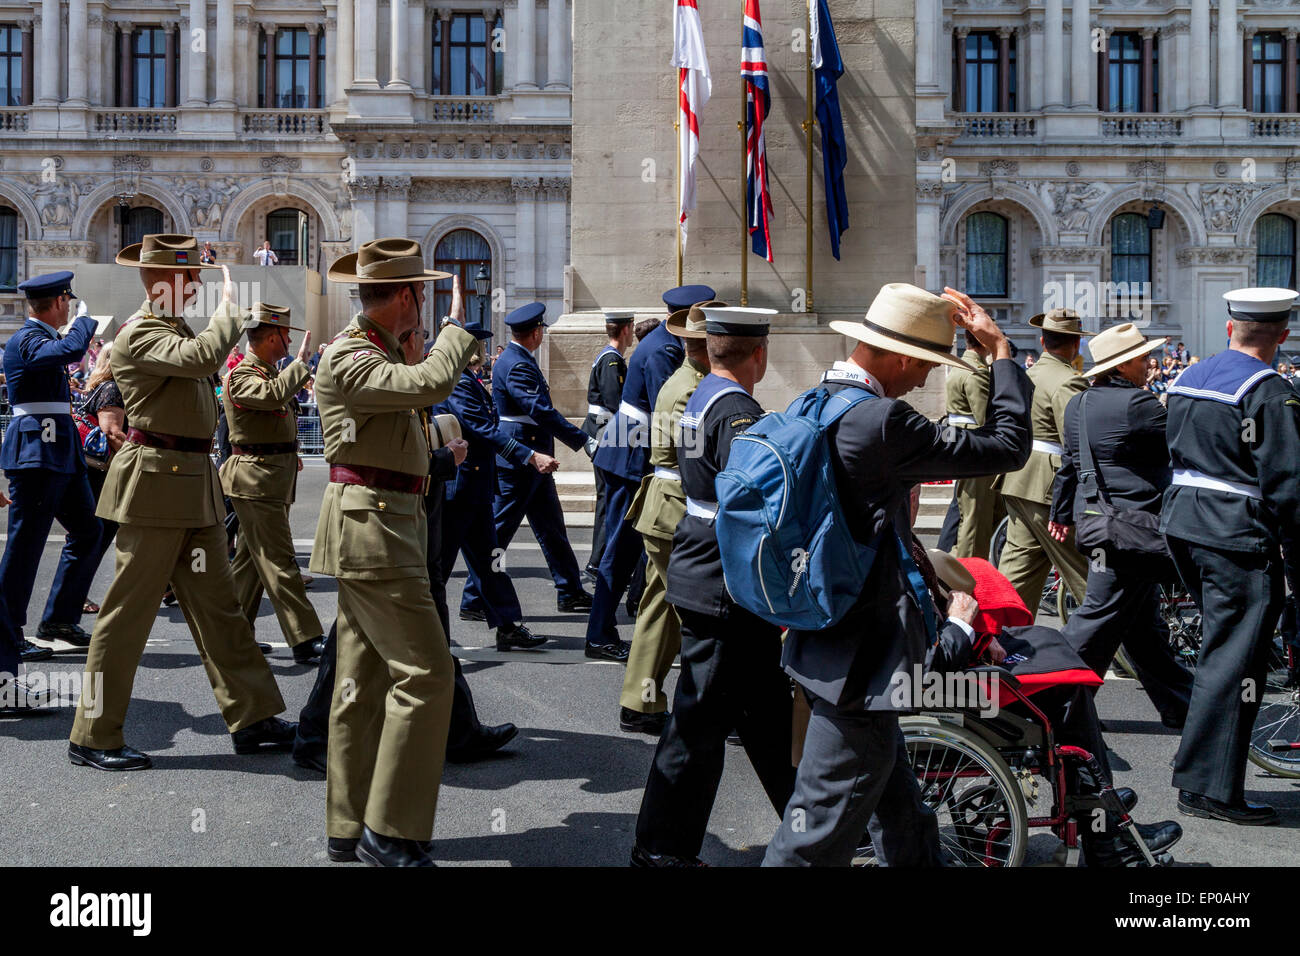 A British Army War Veterans Parade Passes The Cenotaph War Memorial On The 70th Anniversary Of VE Day, London, England Stock Photo